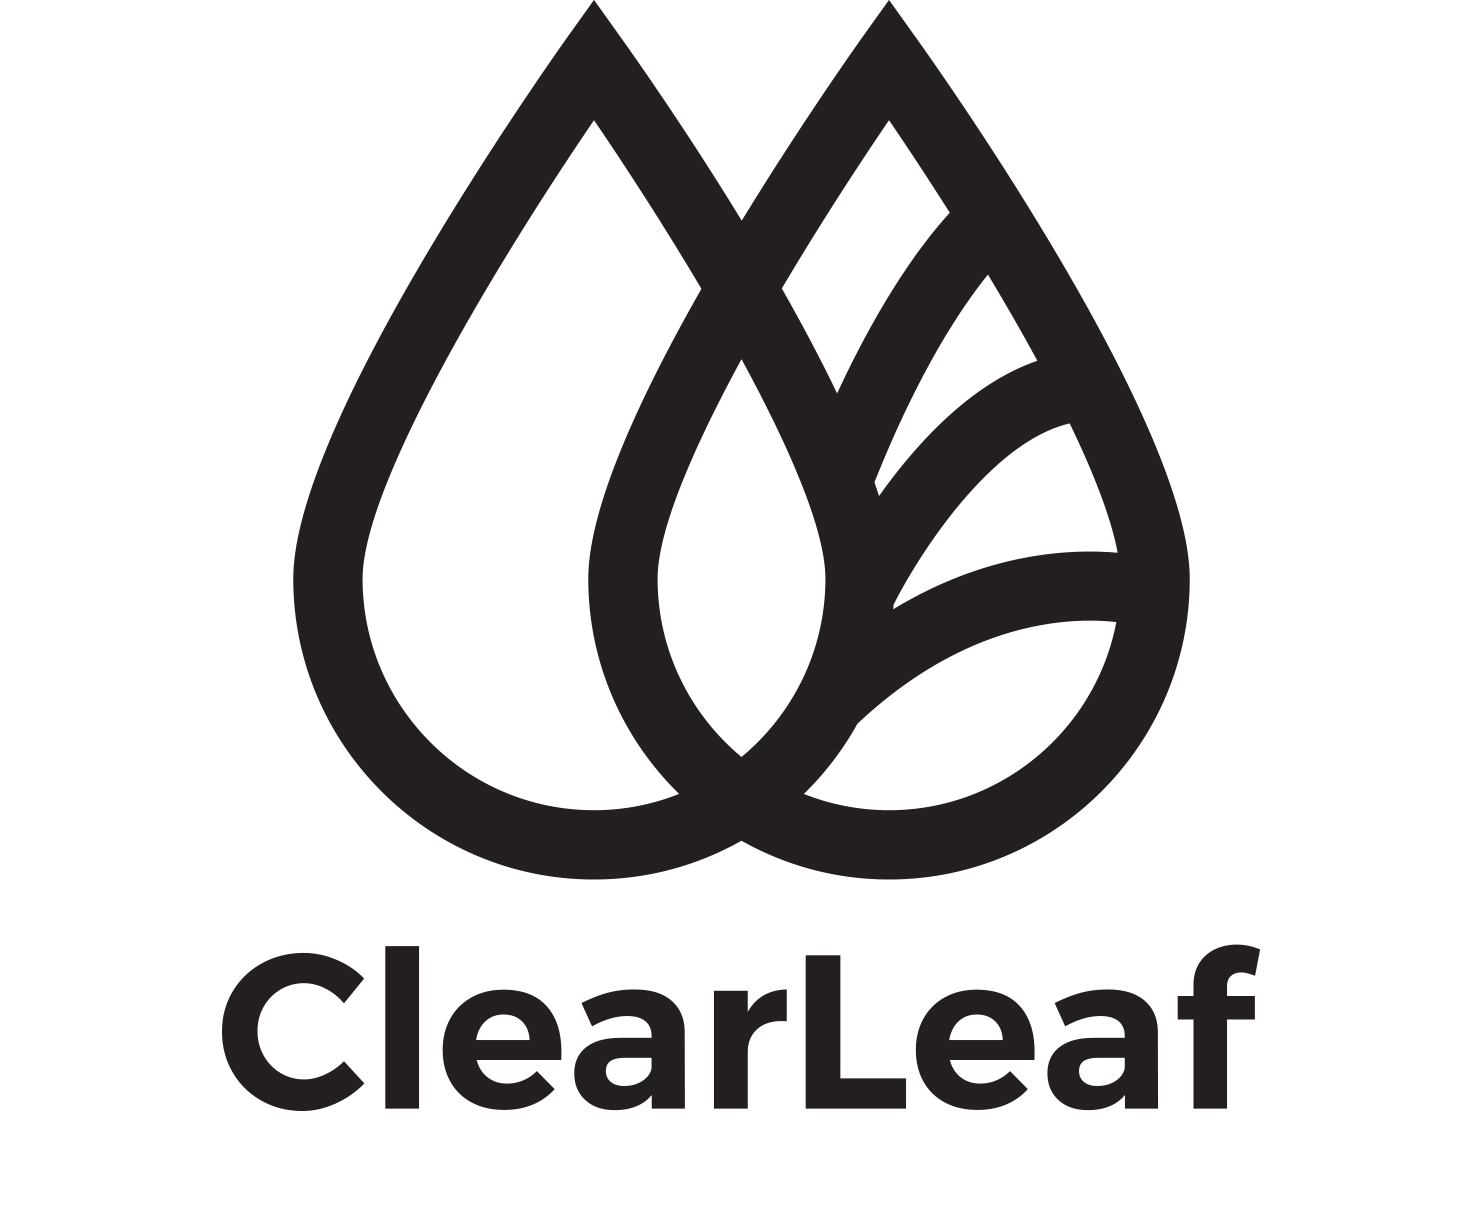 ClearLeaf - Sustainability starts in the fields